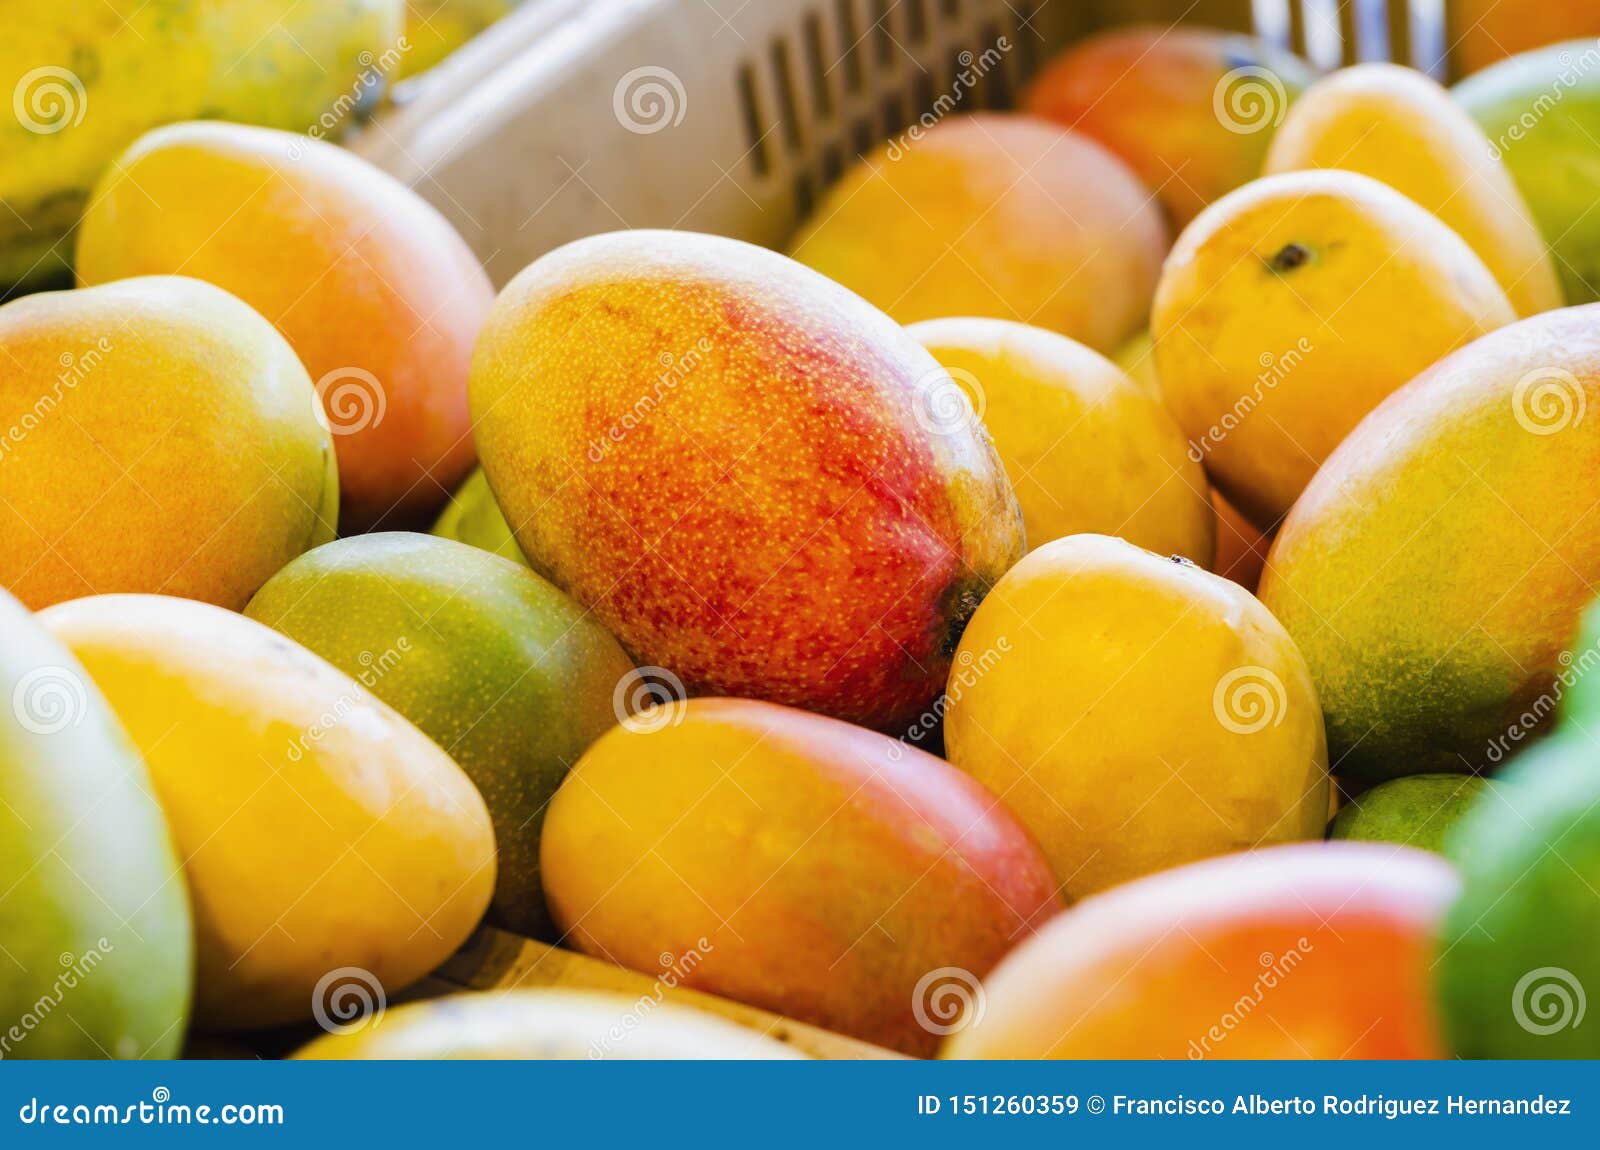 the mango is a citrus fruit that grows in the intertropical zone and is fleshy and sweet pulp. it stands out among its main